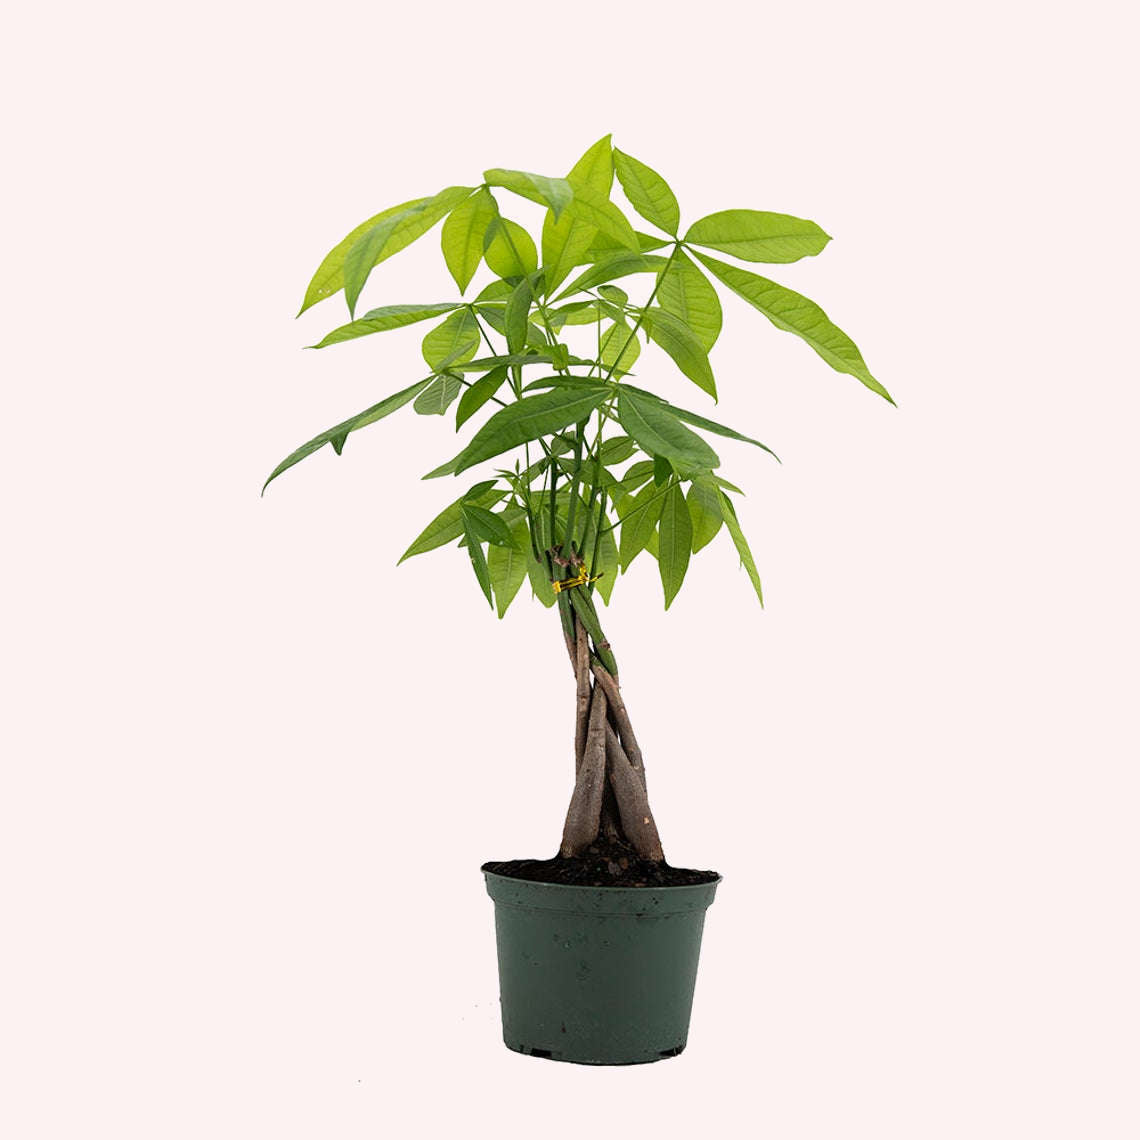 Braided Money Tree in a 4" pot.